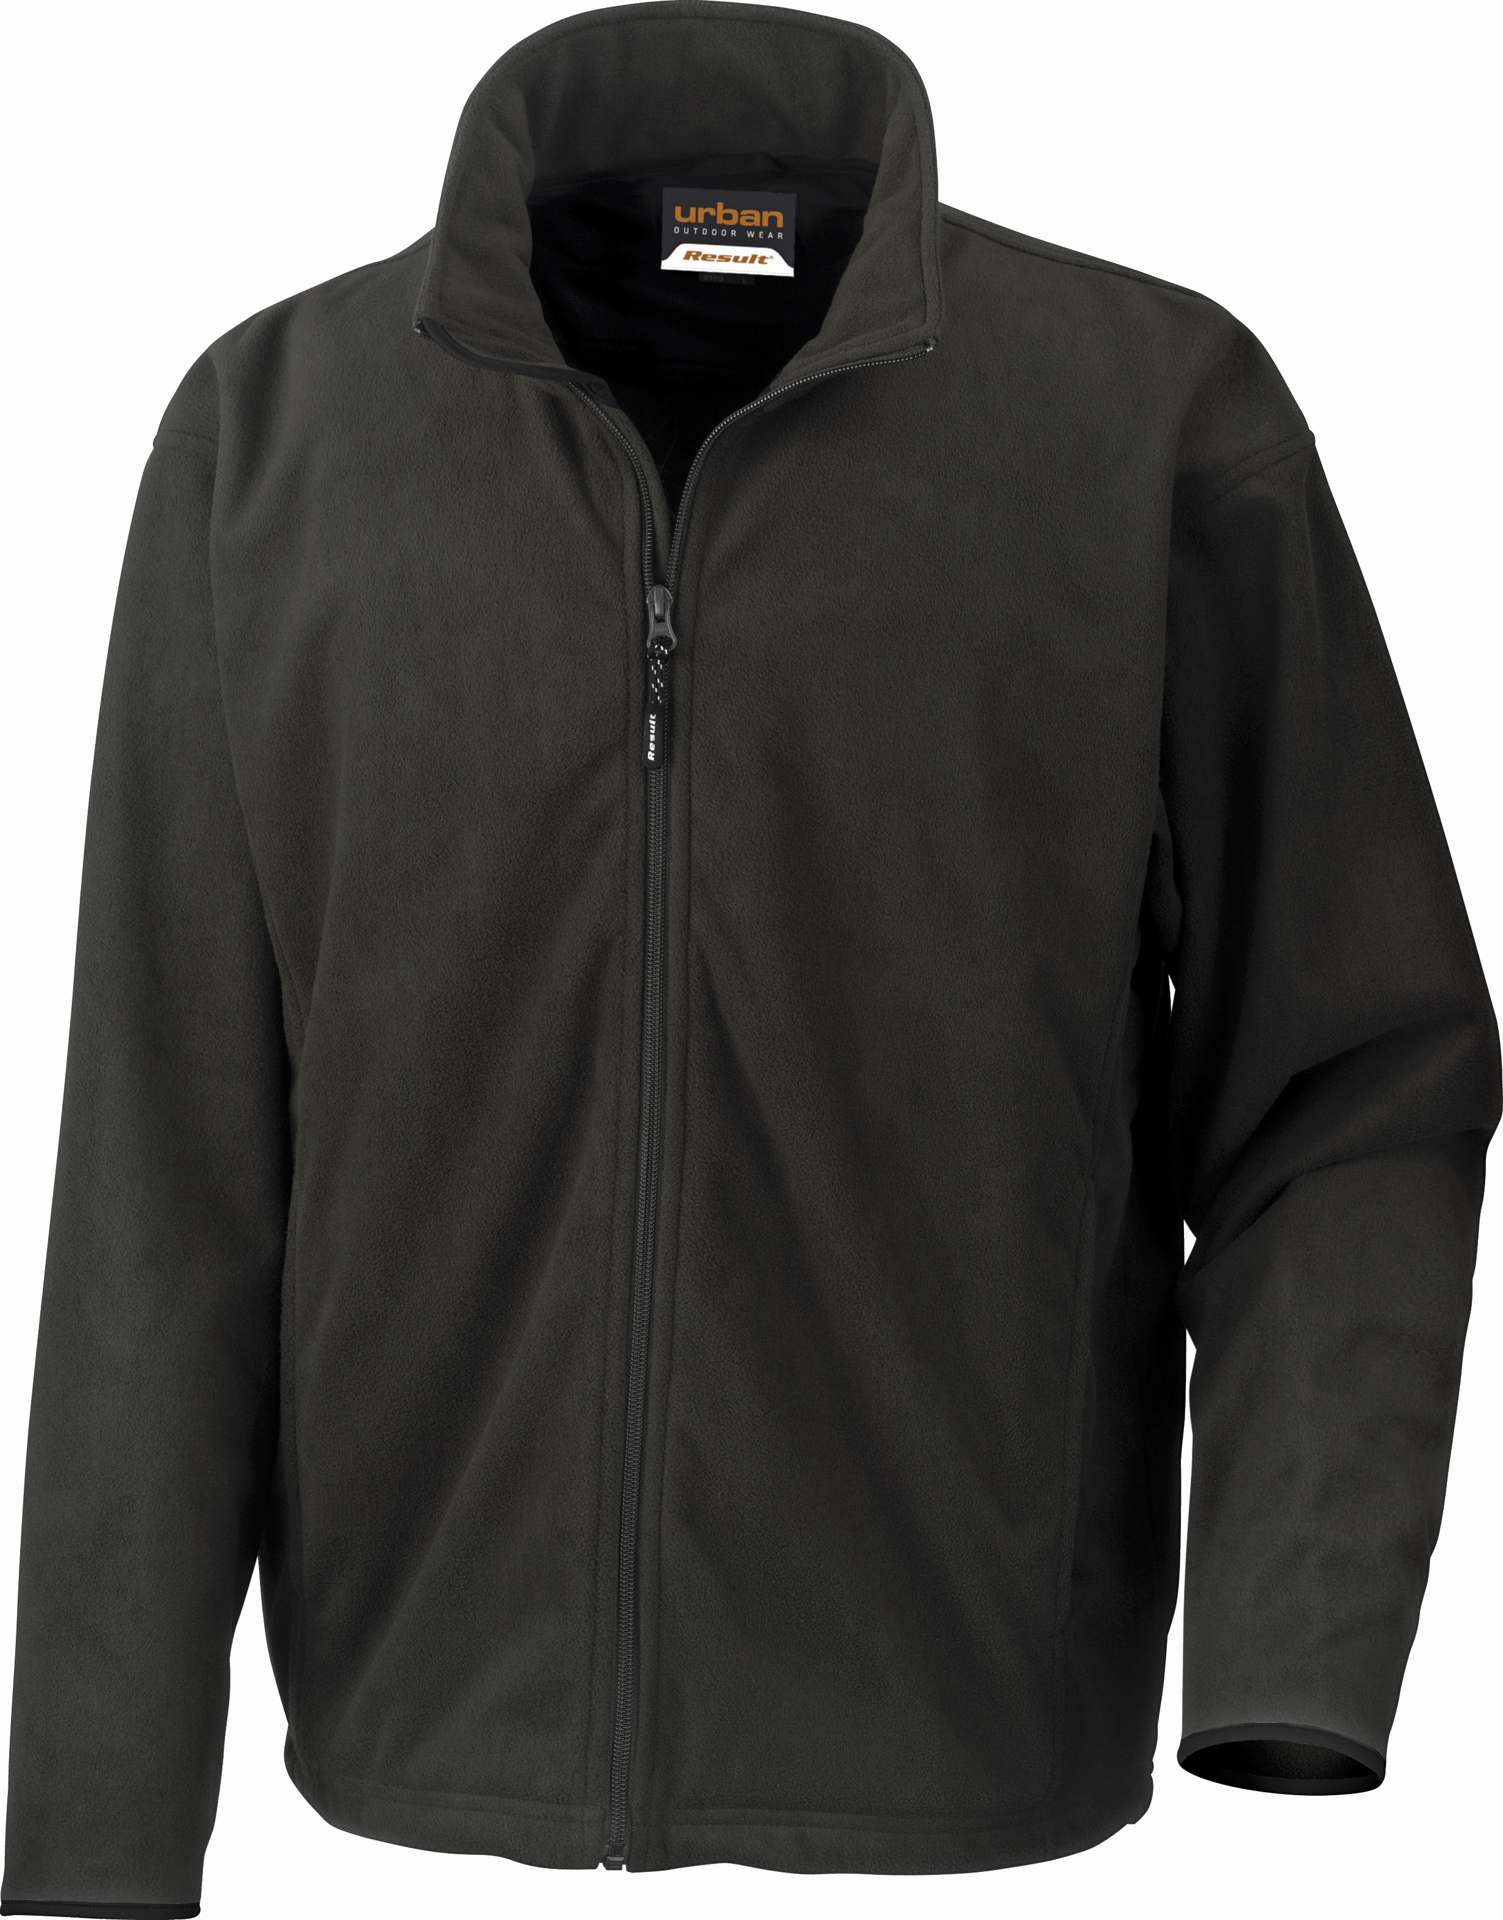 Extreme Climate Stopper Fleece in black with full length zip